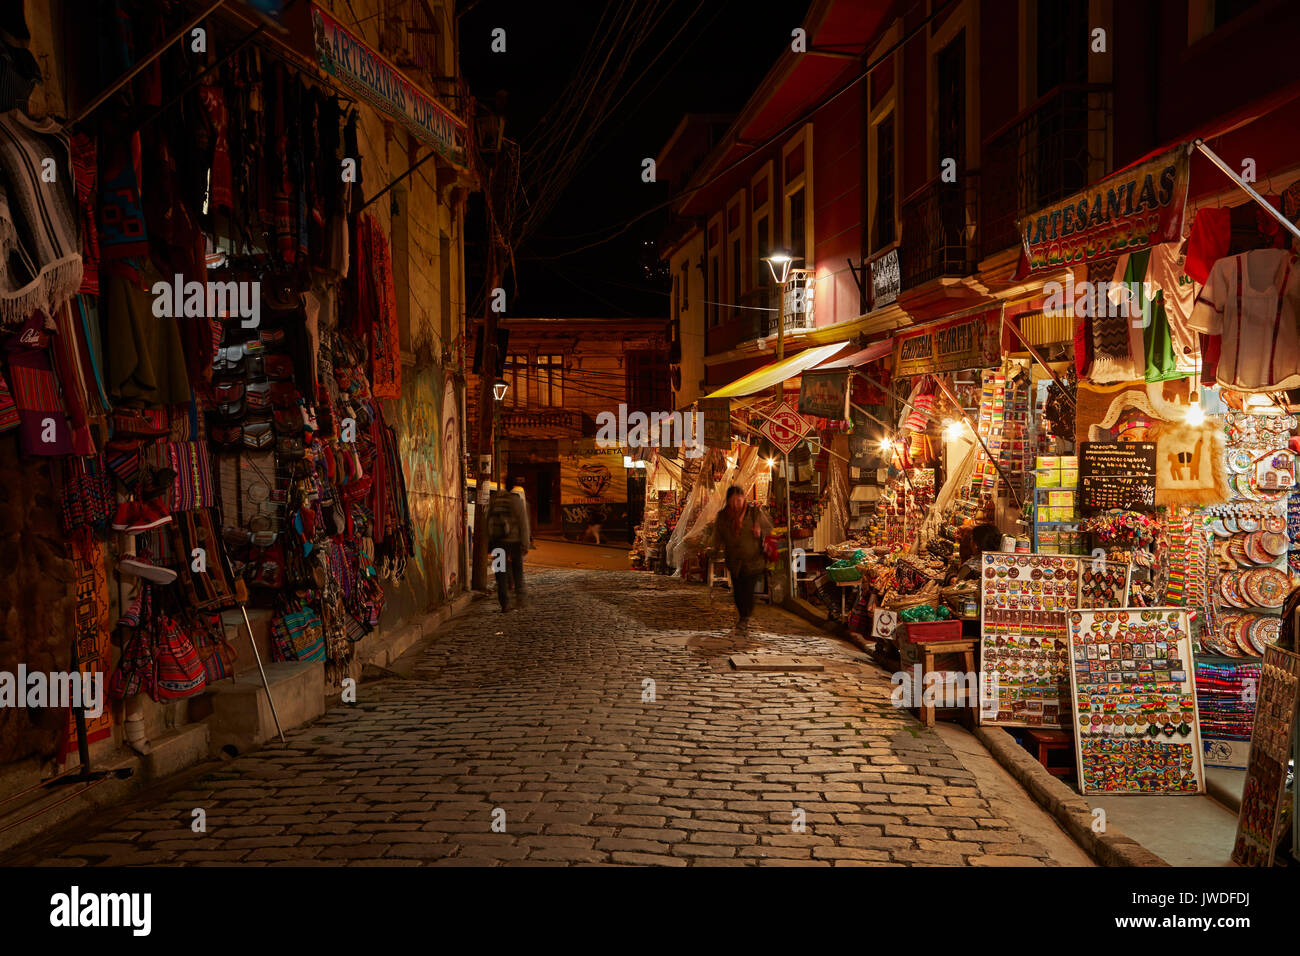 Shops selling Bolivian handicrafts along Linares at night, Witches Market, La Paz, Bolivia, South America Stock Photo